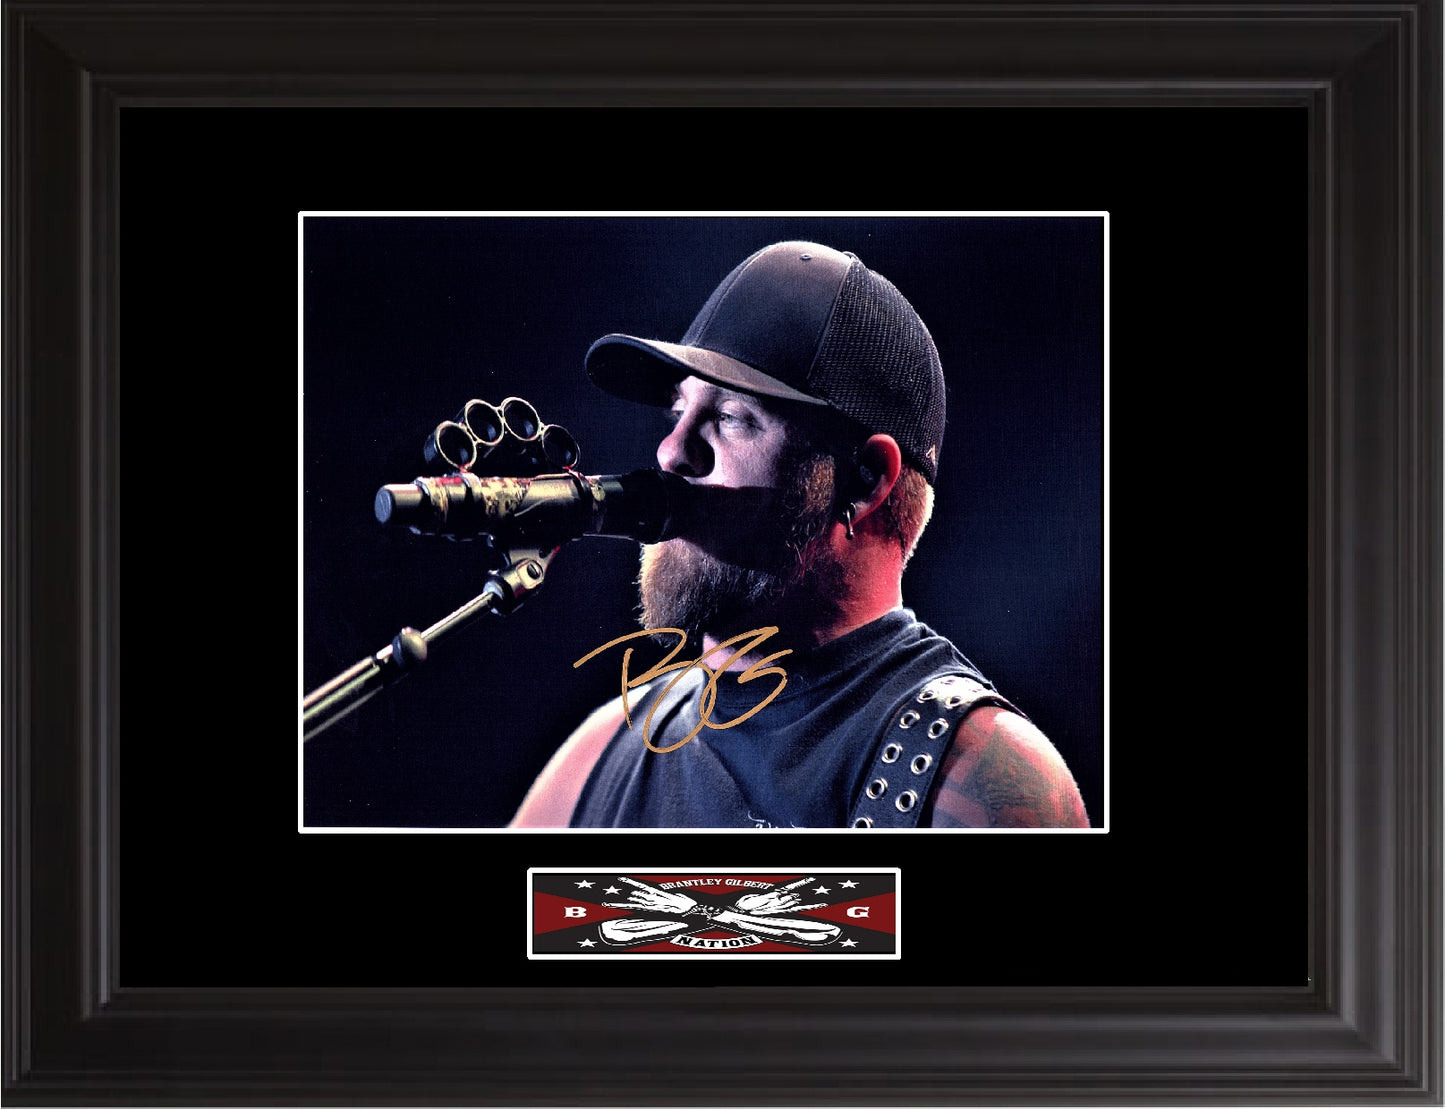 Brantley Gilbert Autographed Photo - Zion Graphic Collectibles